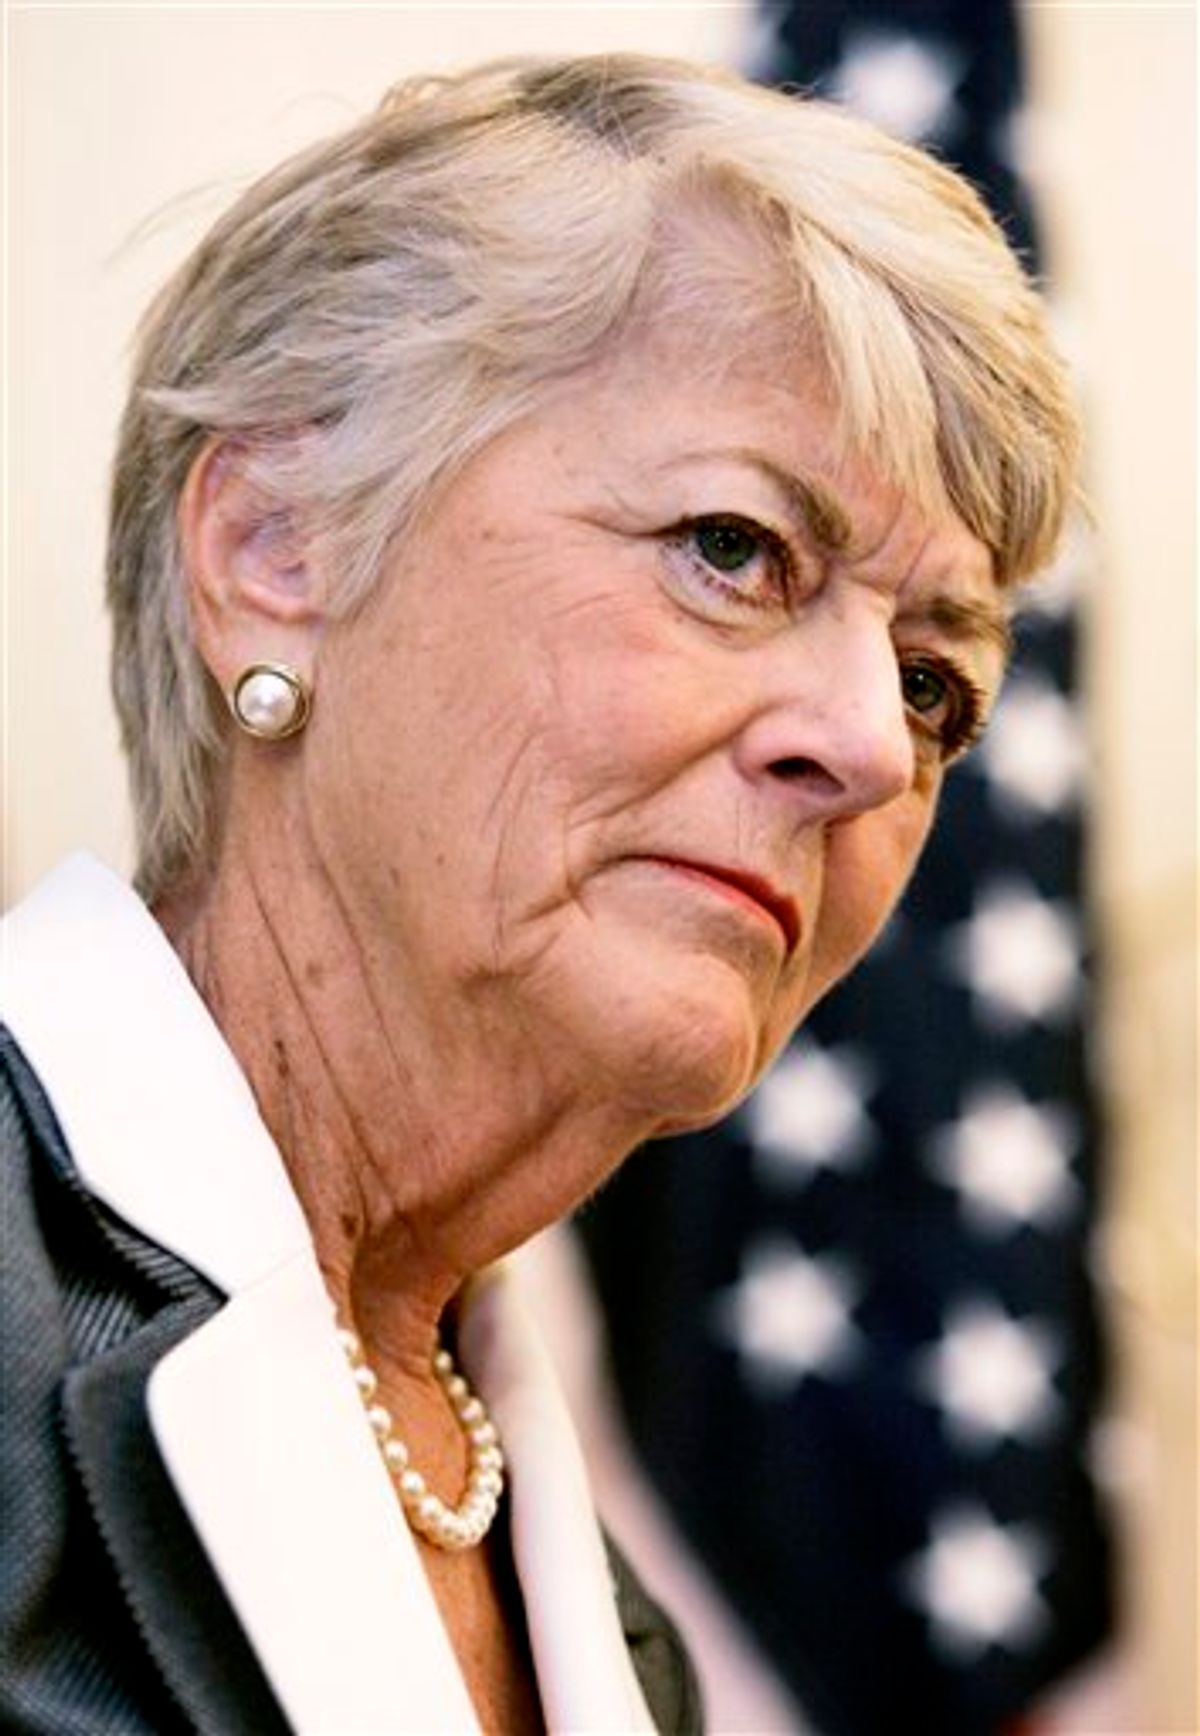 FILE - This Friday, May 4, 2007 picture shows former Democratic vice presidential candidate Geraldine Ferraro during a news conference before a fundraising lunch hosted by U.S. Rep. Jan Schakowsky, D-Ill., in Chicago. The first woman to run for U.S. vice president on a major party ticket has died. Geraldine Ferraro was 75. A family friend said Ferraro, who was diagnosed with blood cancer in 1998, died Saturday, March 26, 2011 at Massachusetts General Hospital. (AP Photo/Charles Rex Arbogast) (AP)